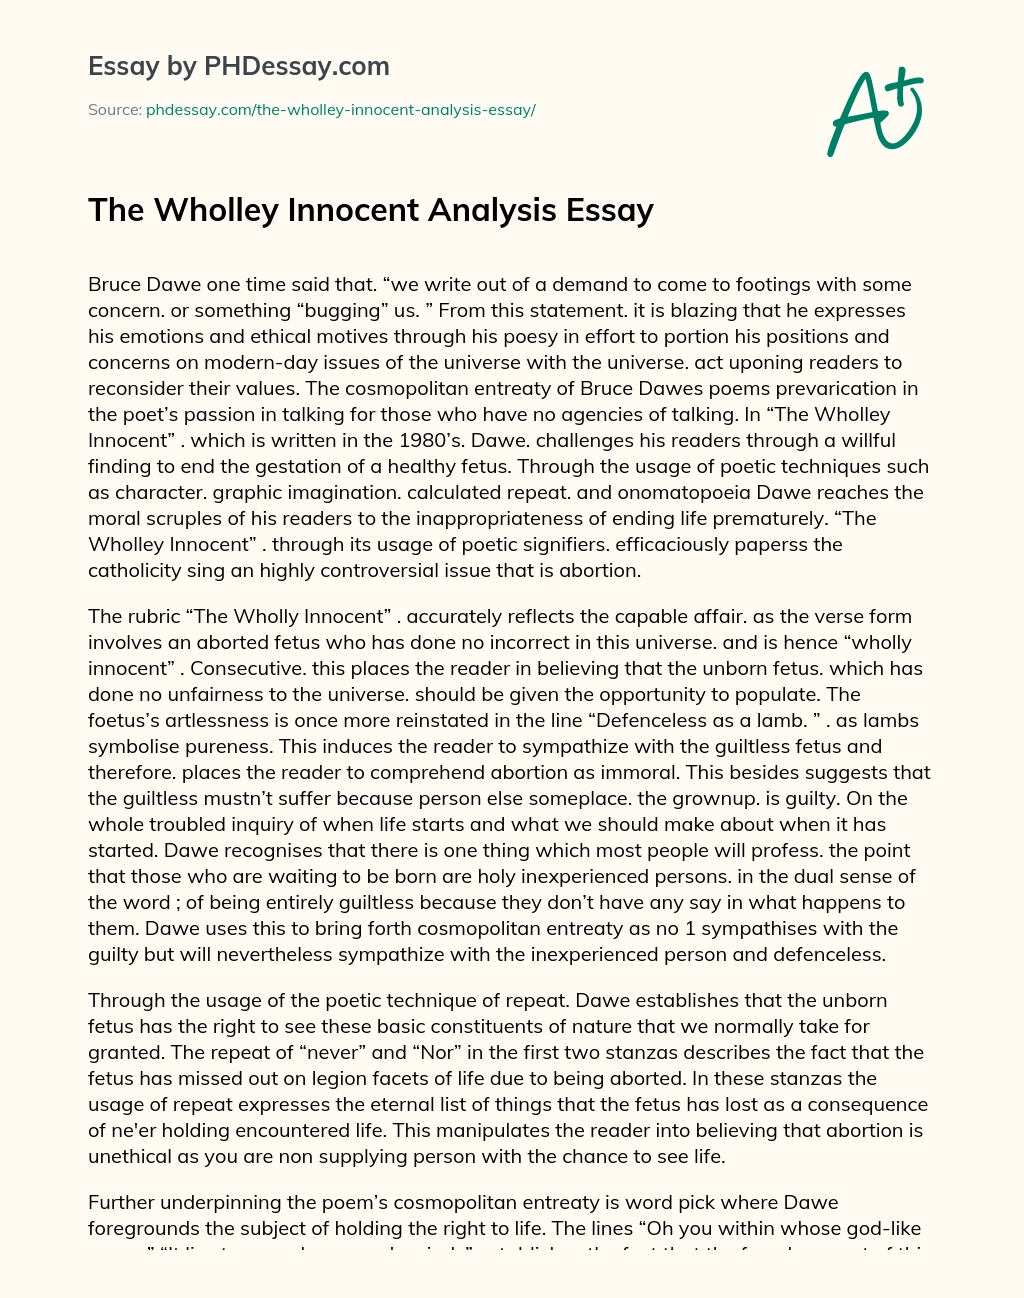 The Wholley Innocent Analysis Essay essay